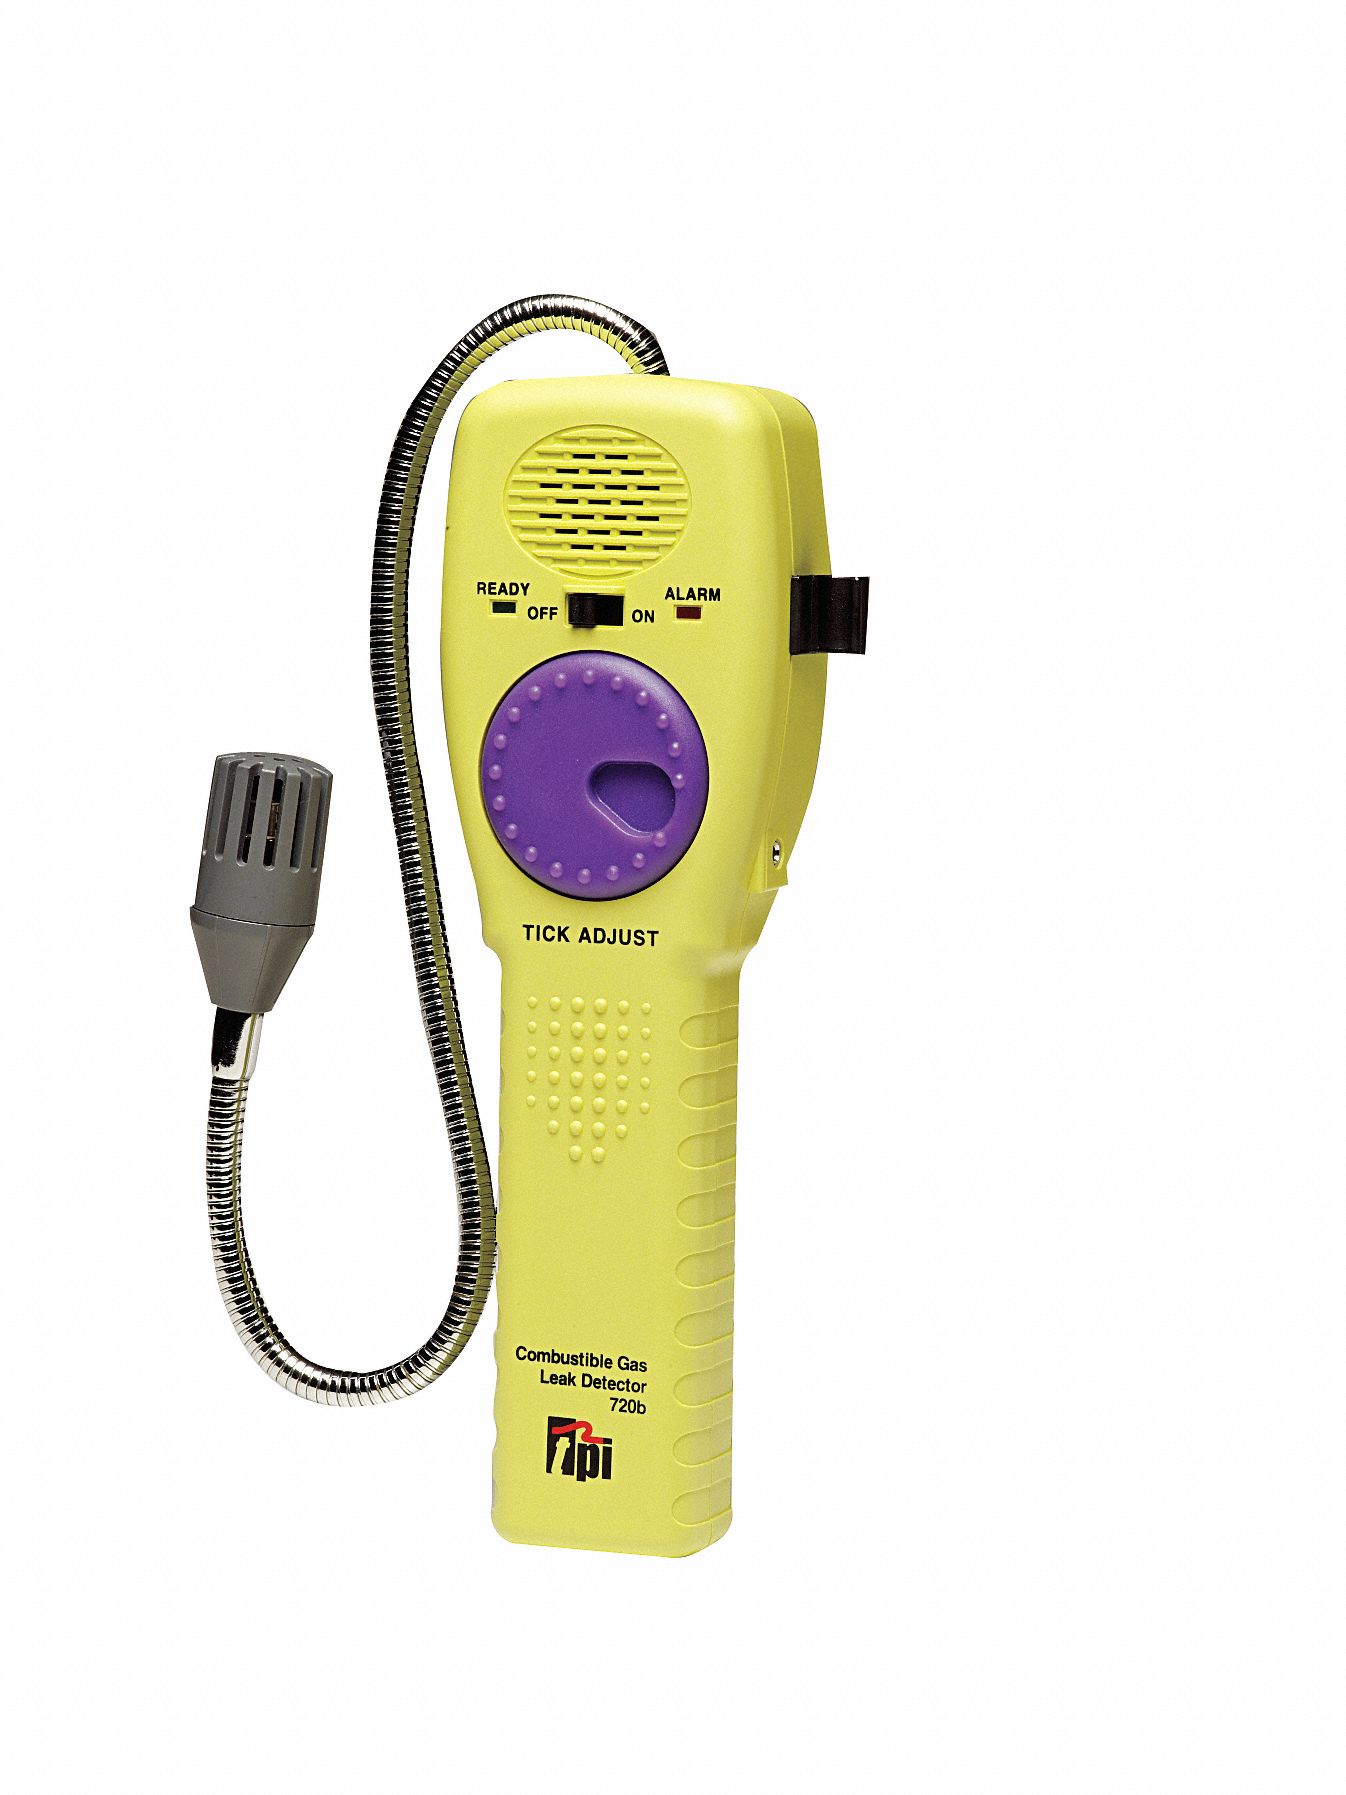 Combustible Gas Detector: Detects Combustible Gases, Audible/Visual Indicator